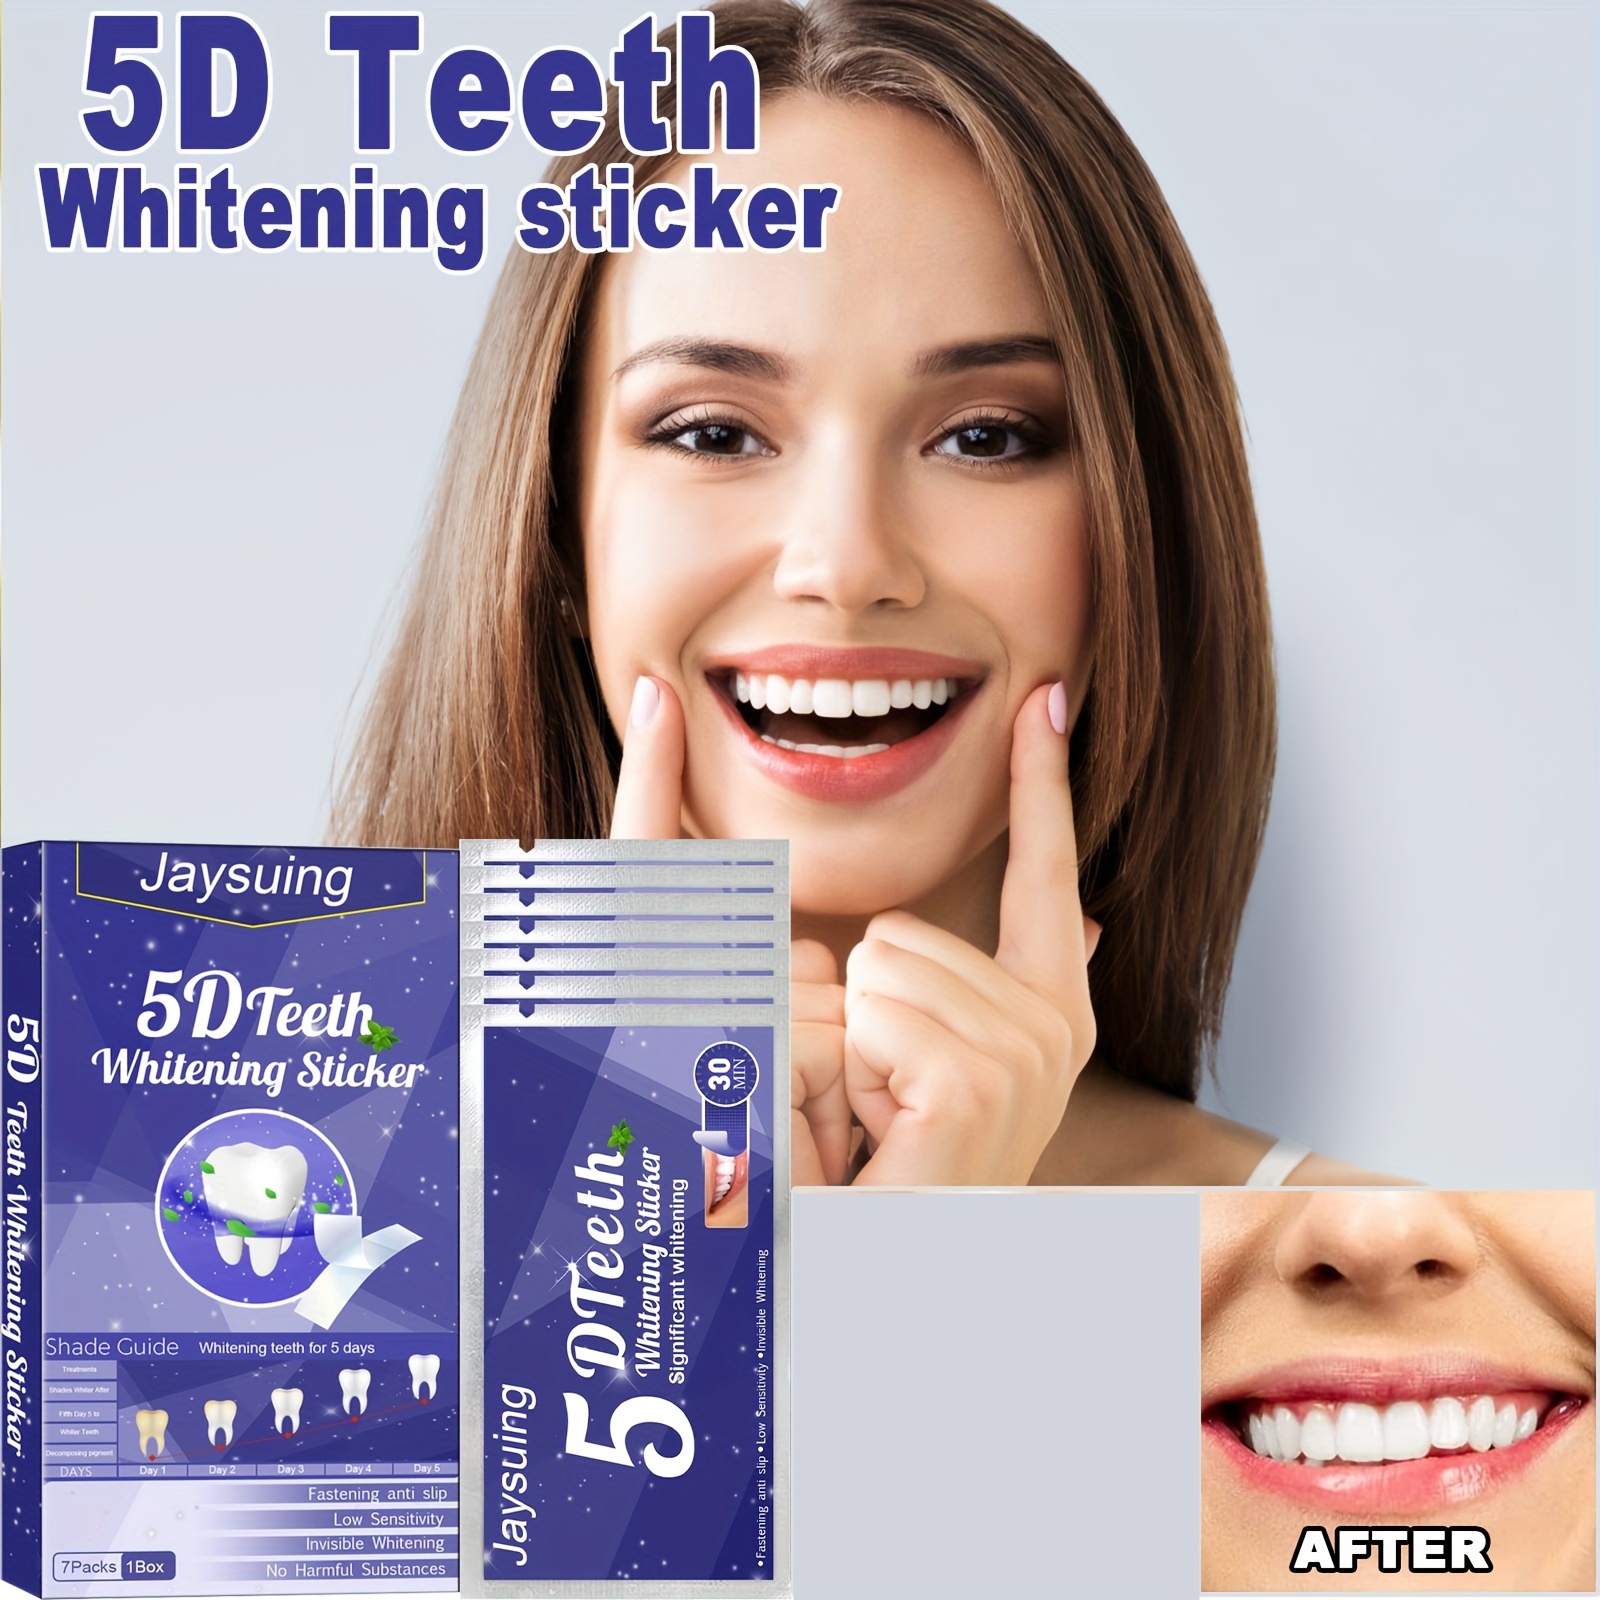 200pcs Disposable Dental Medical Surgical Cotton Rolls Tooth Gem  High-purity Cotton Roll Dentist Supplies Teeth Whitening